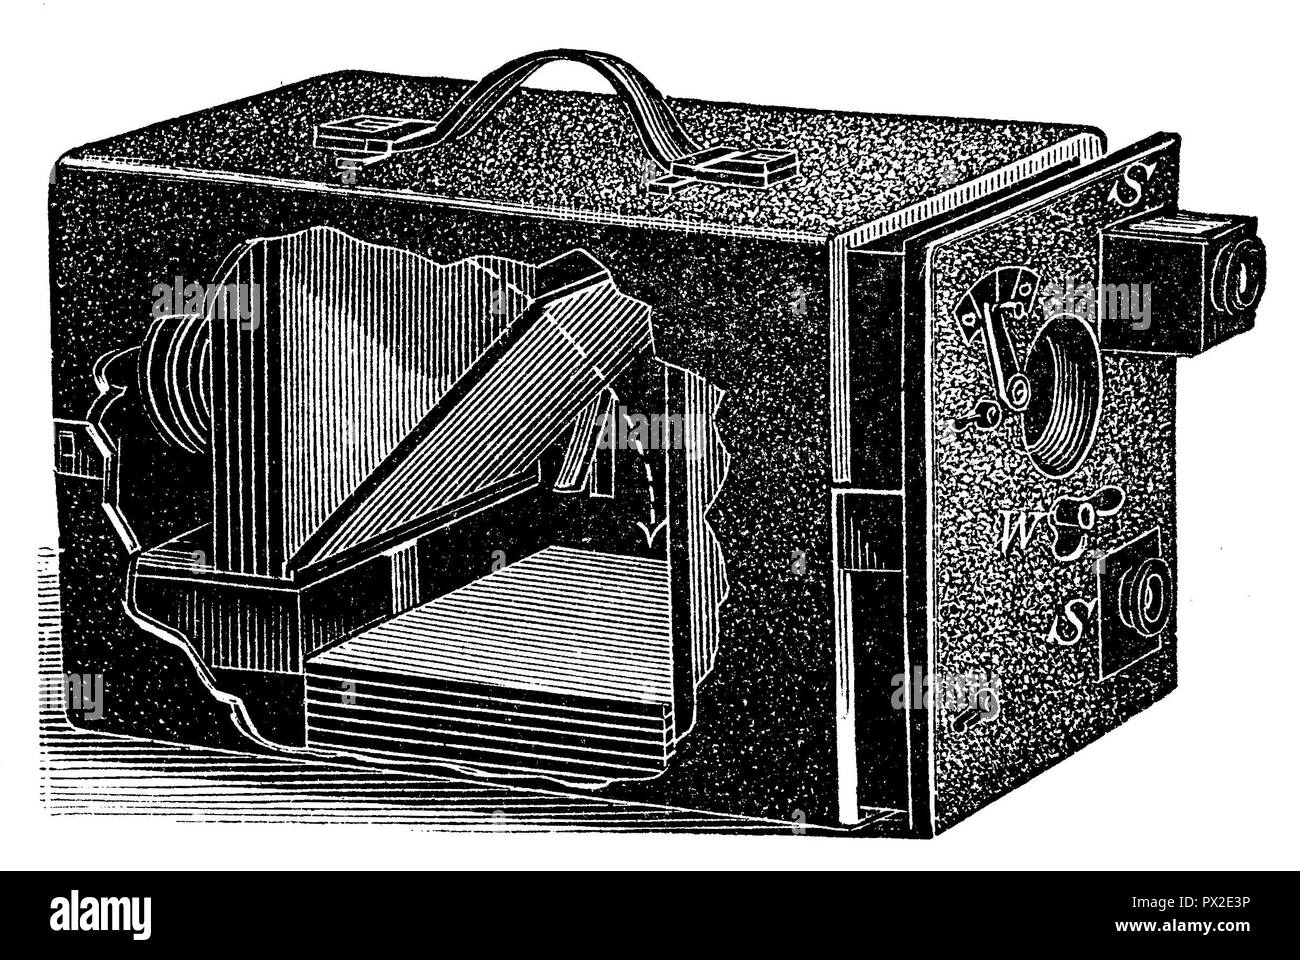 Instantaneous camera with magazine, Stock Photo